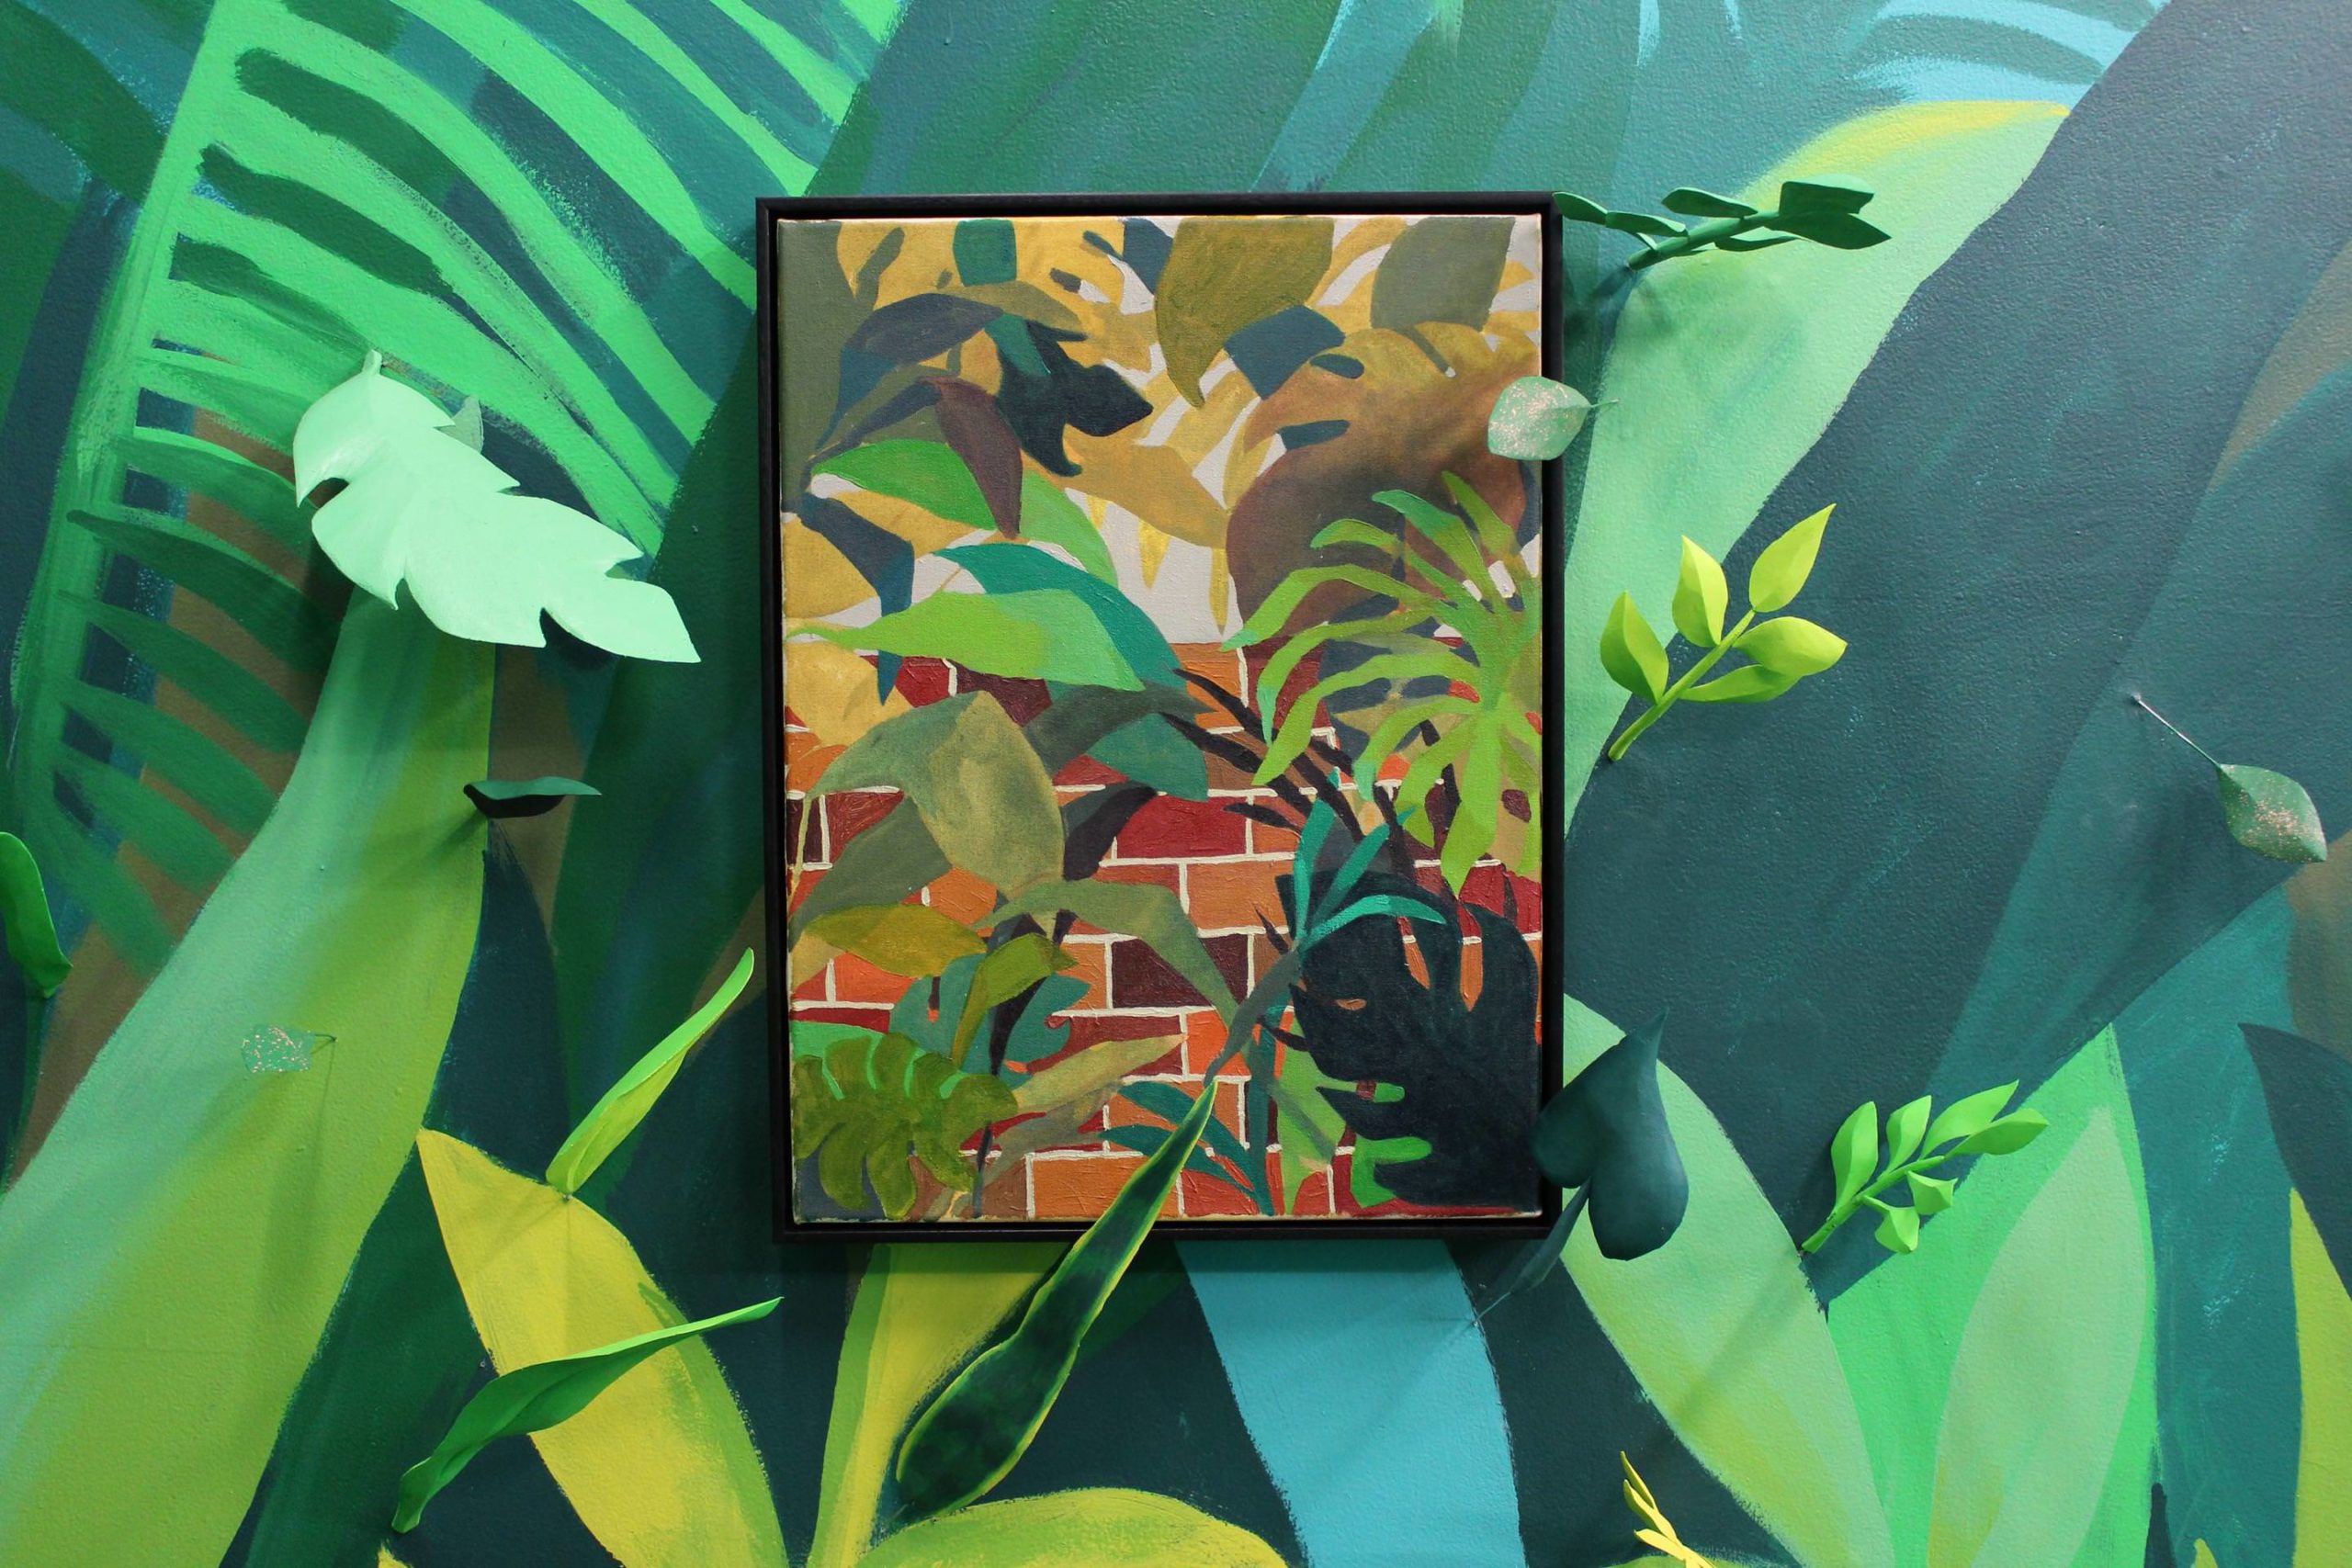 Secrets of Leaves at Victori + Mo by Adrienne Elise Tarver